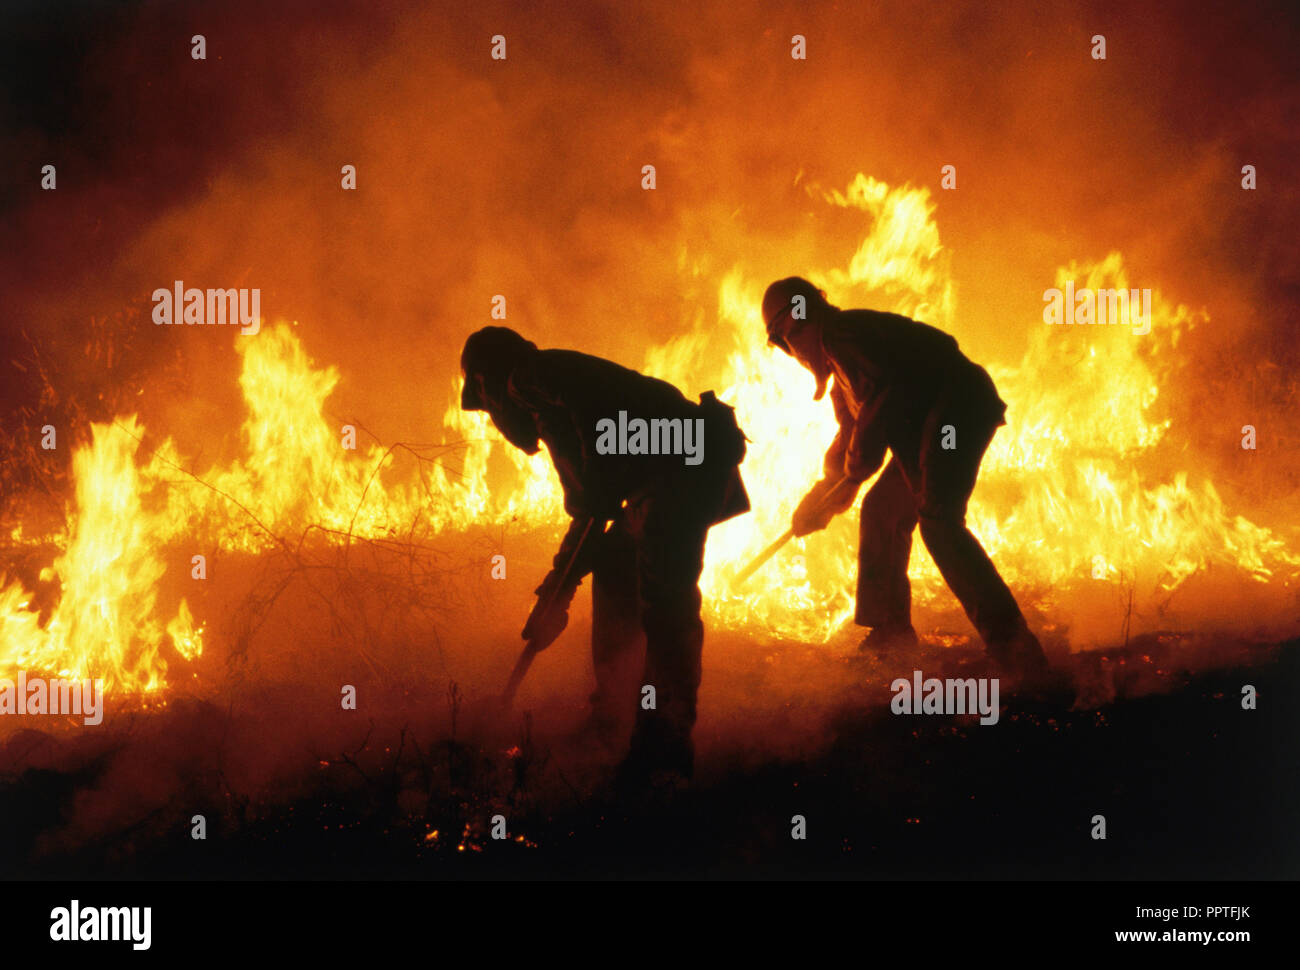 Silhouettes of firemen fighting a brush fire in California, USA Stock Photo